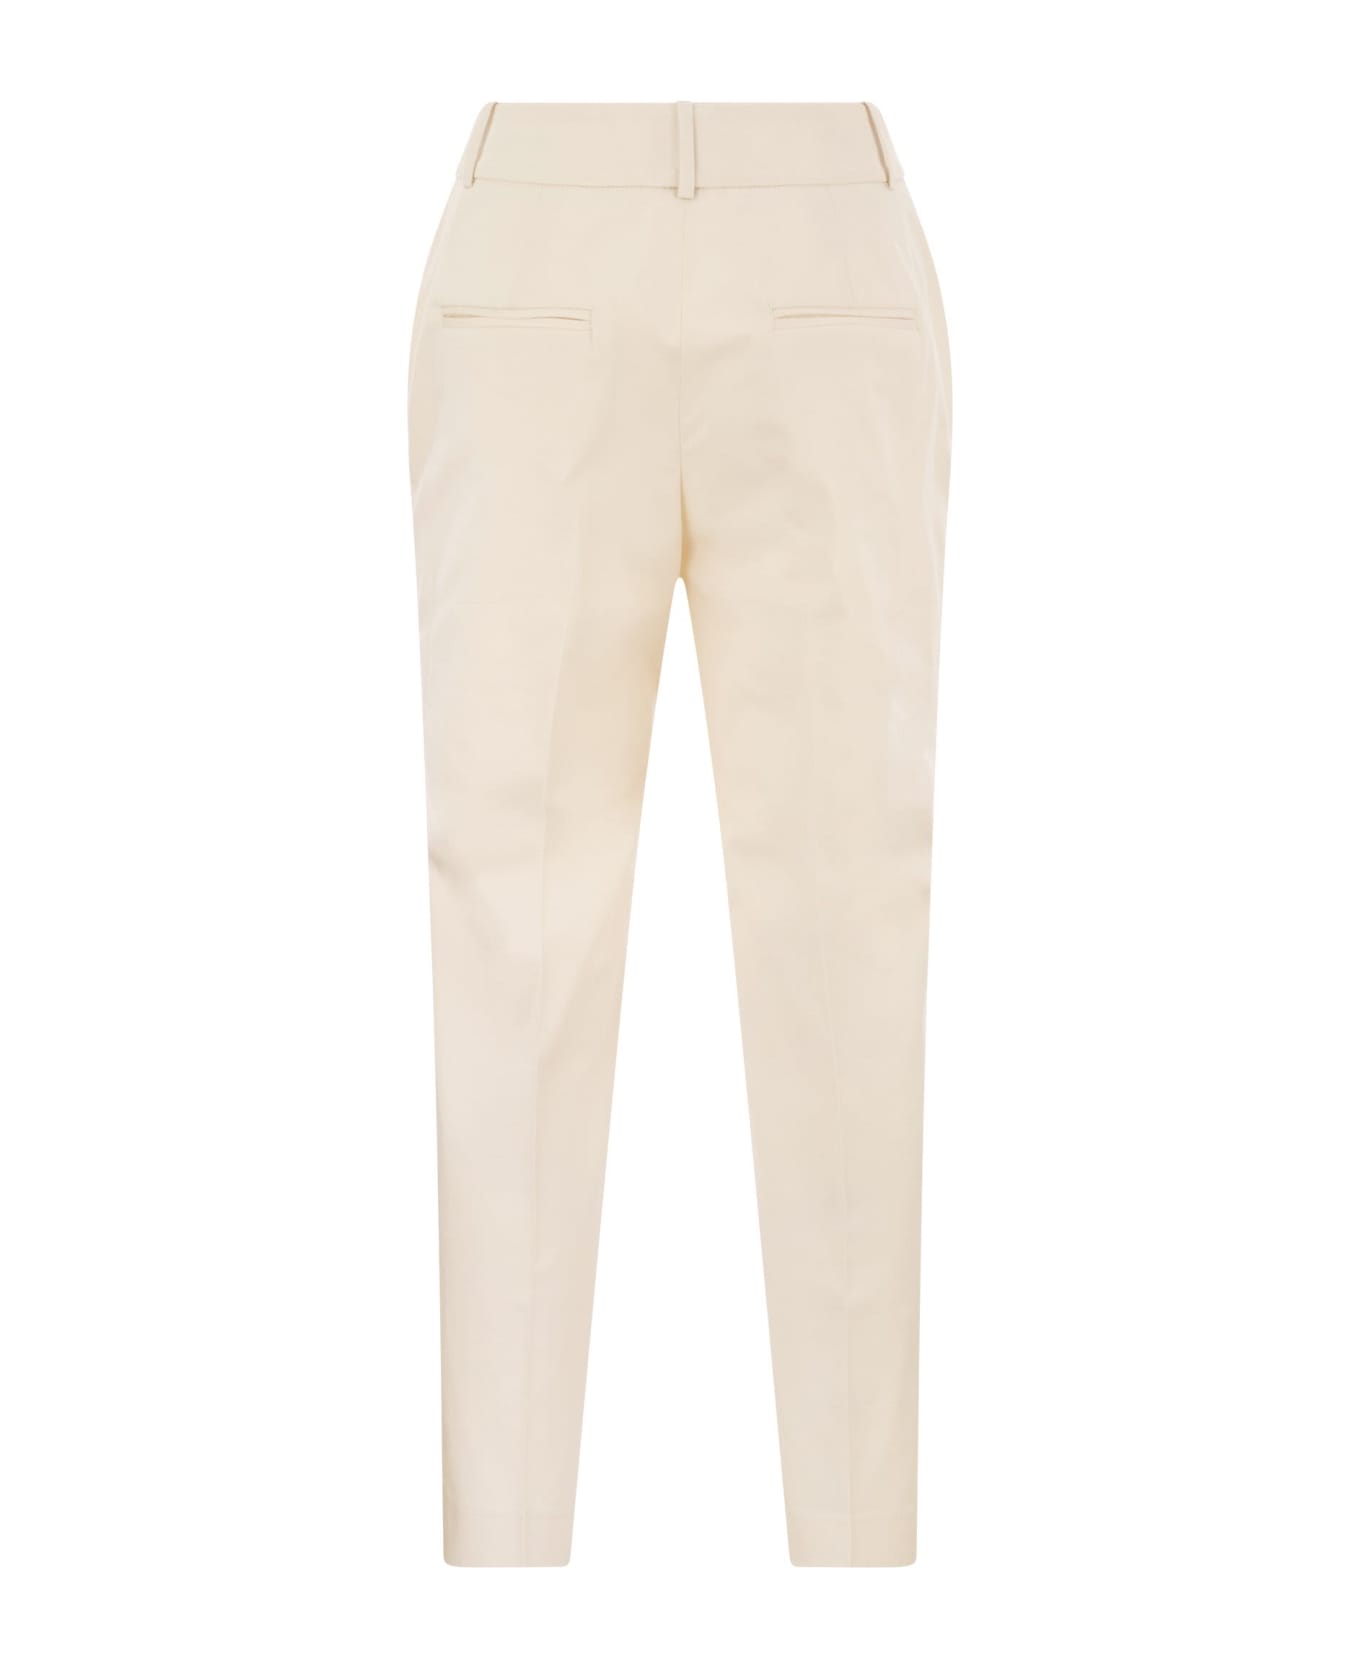 Peserico Stretch Cotton Trousers - Cream ボトムス